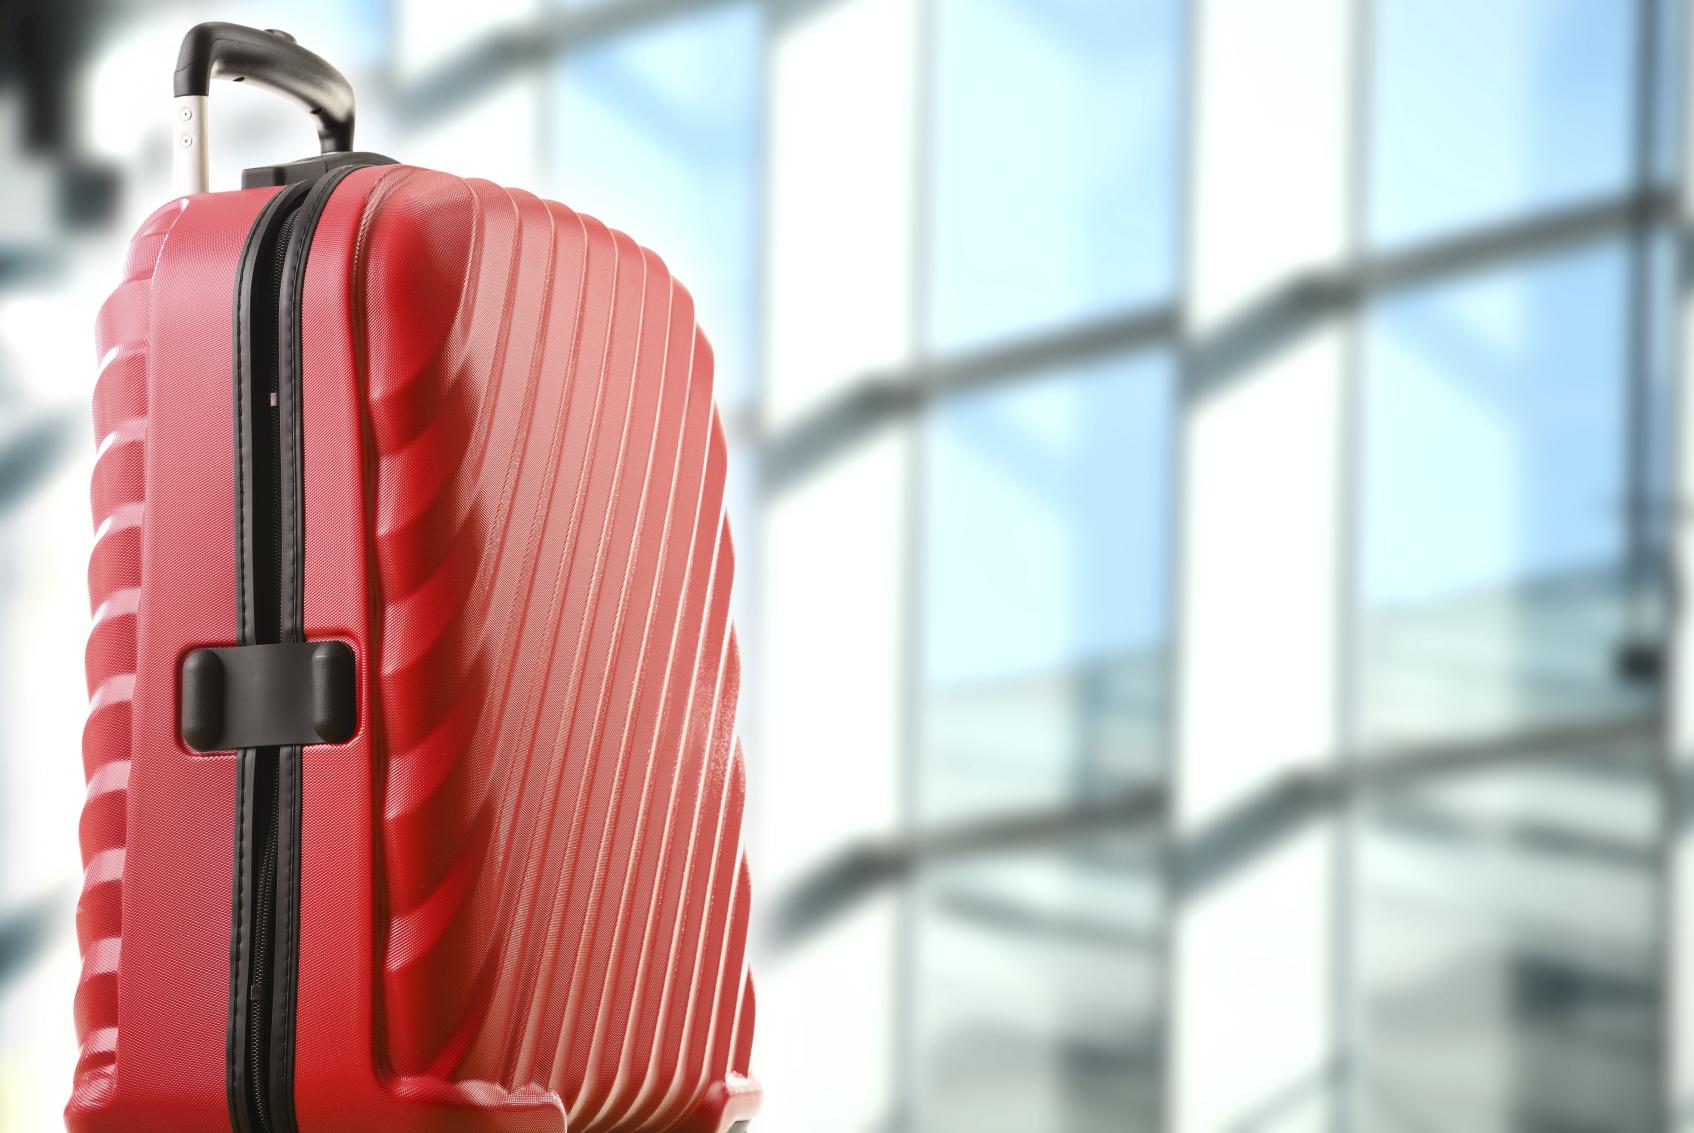 A Red Suitcase at the Airport (Photo: iStock)